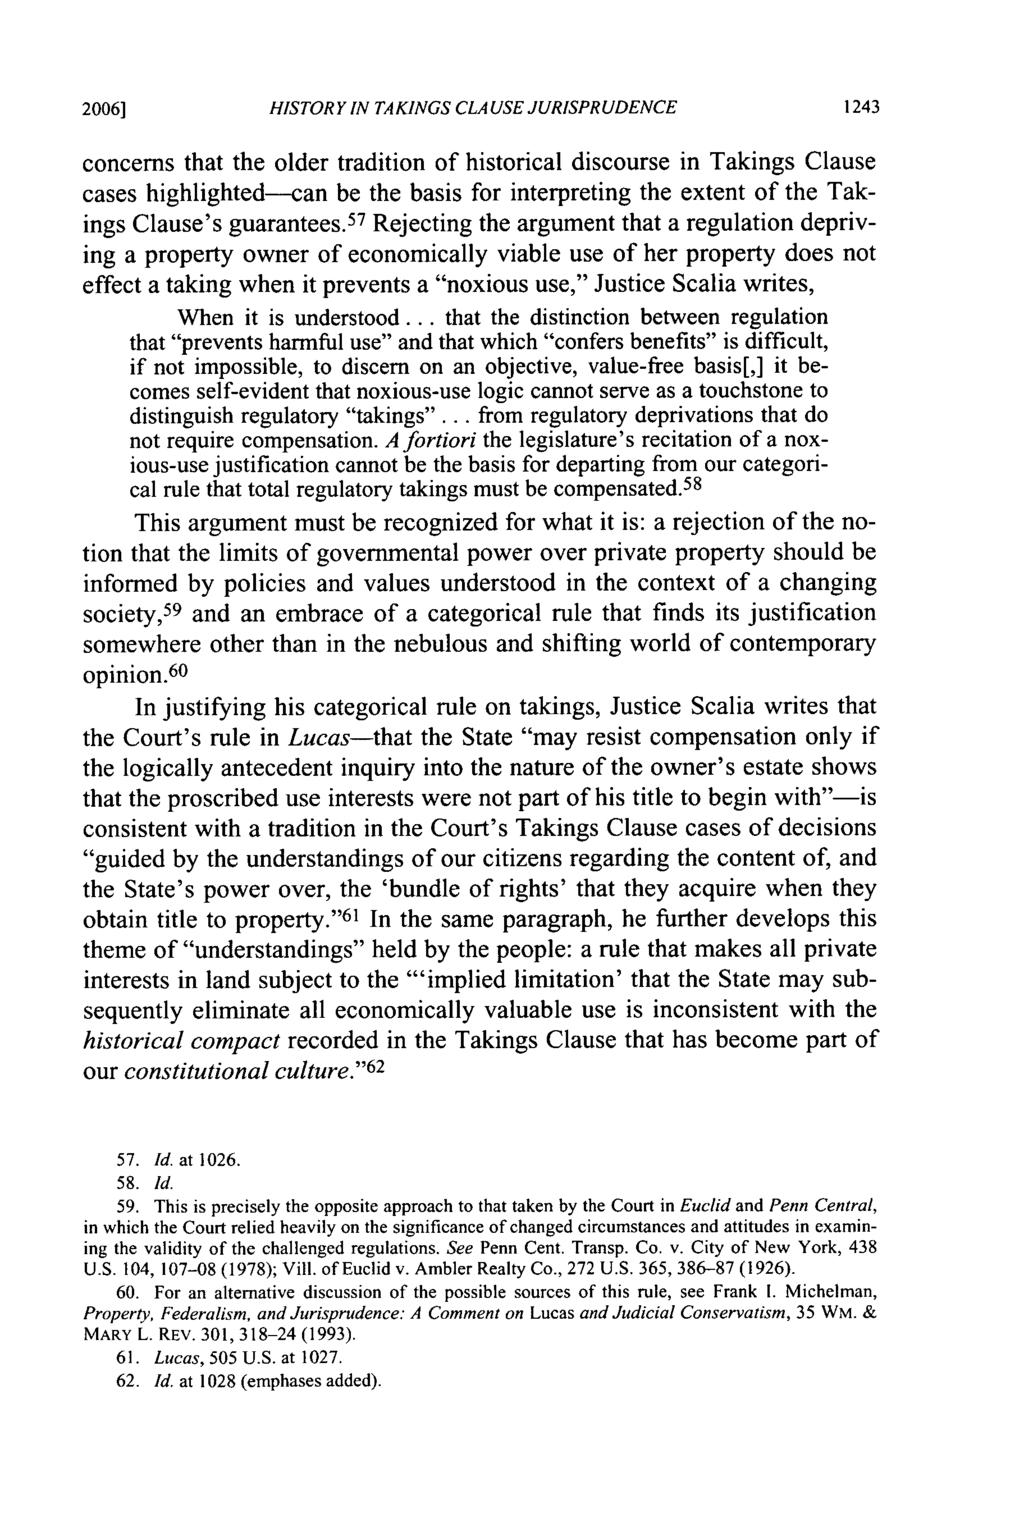 2006] HISTORY IN TAKINGS CLAUSE JURISPRUDENCE concerns that the older tradition of historical discourse in Takings Clause cases highlighted--can be the basis for interpreting the extent of the